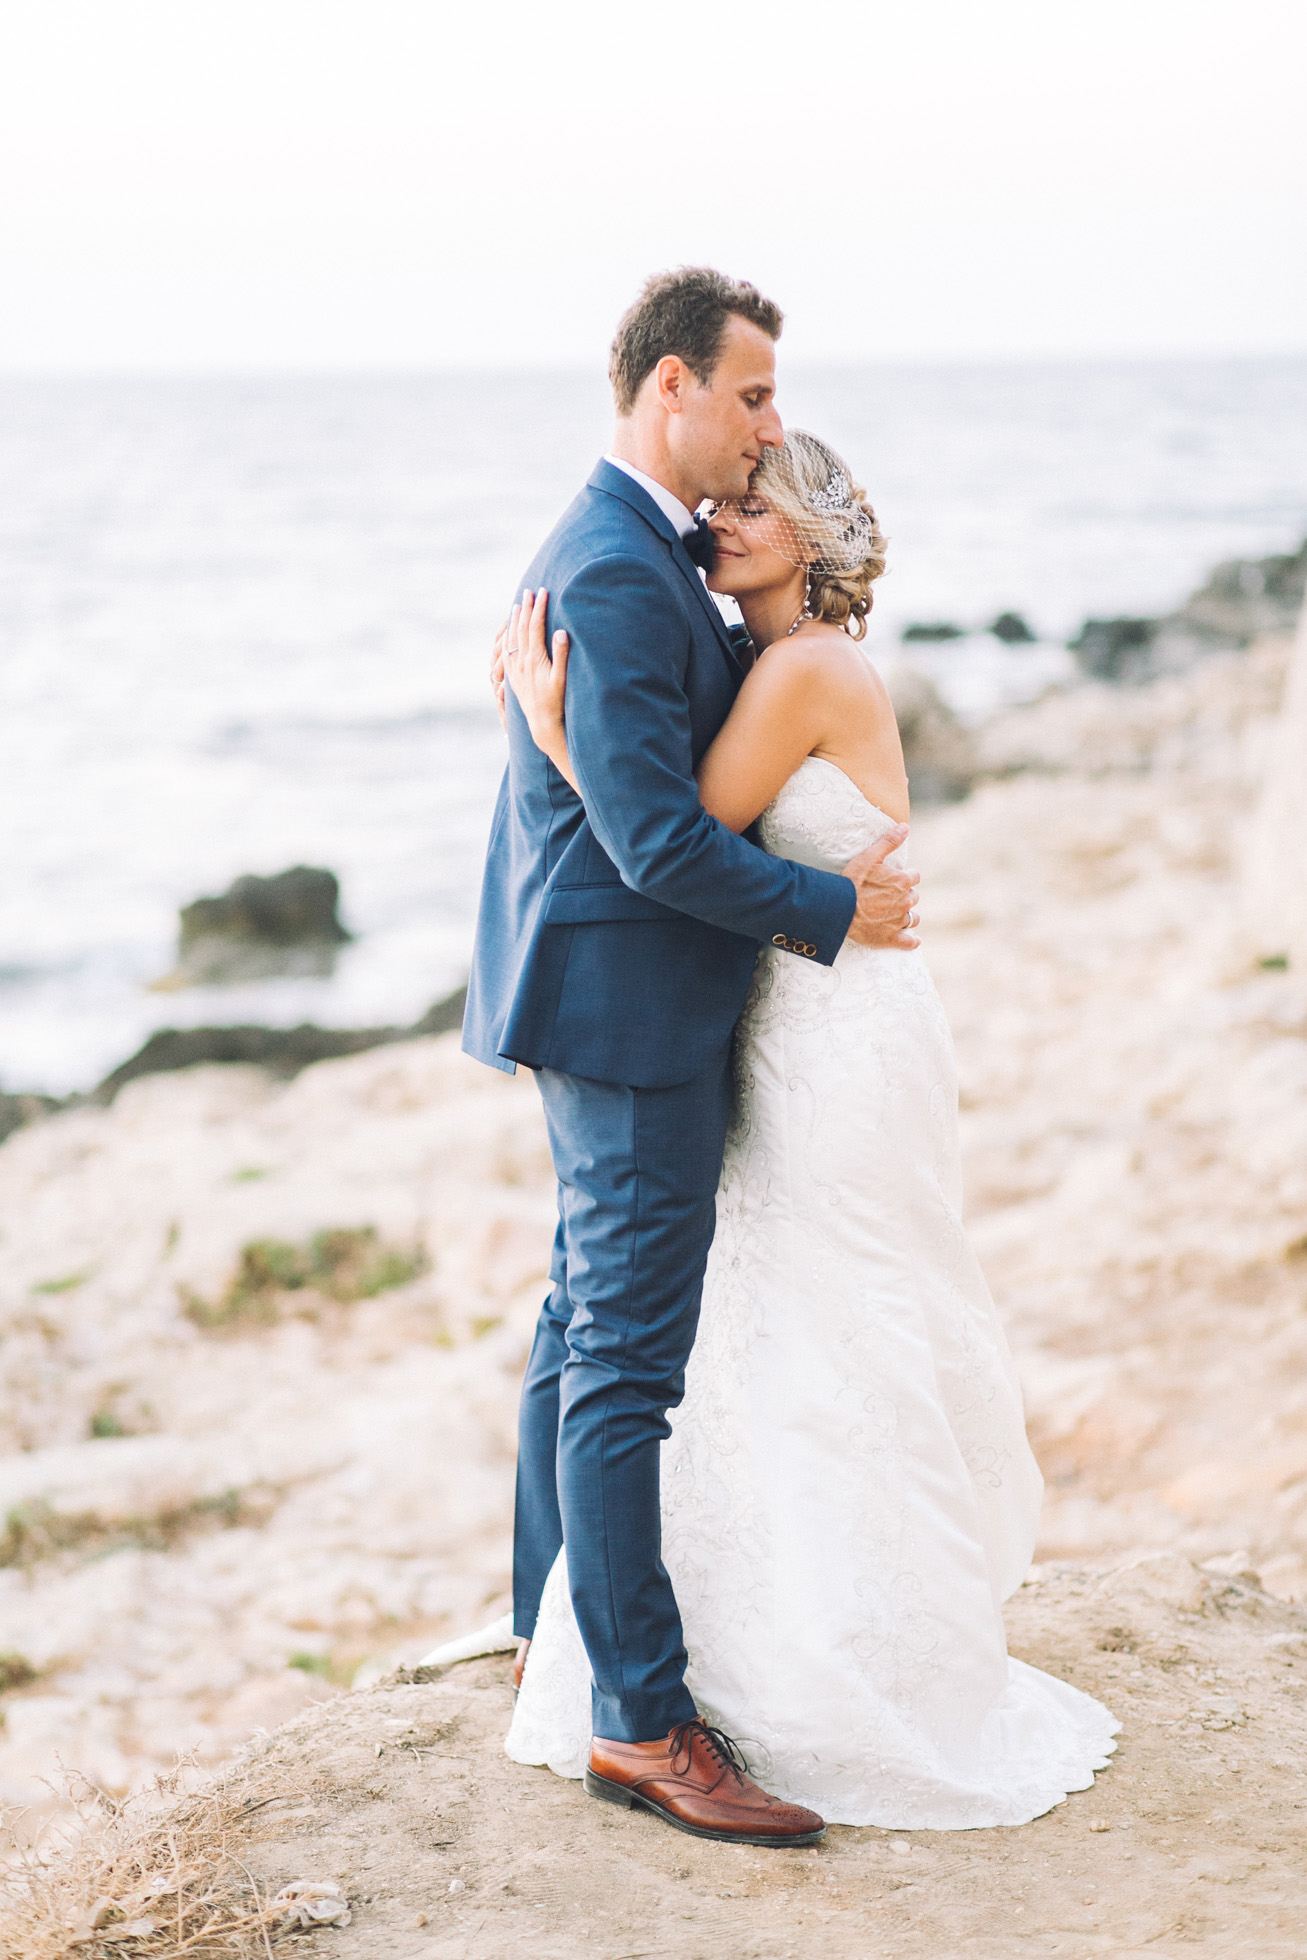 Just married! Elegant bride and groom posing for portraits on their destination wedding day in Crete island, Greece.